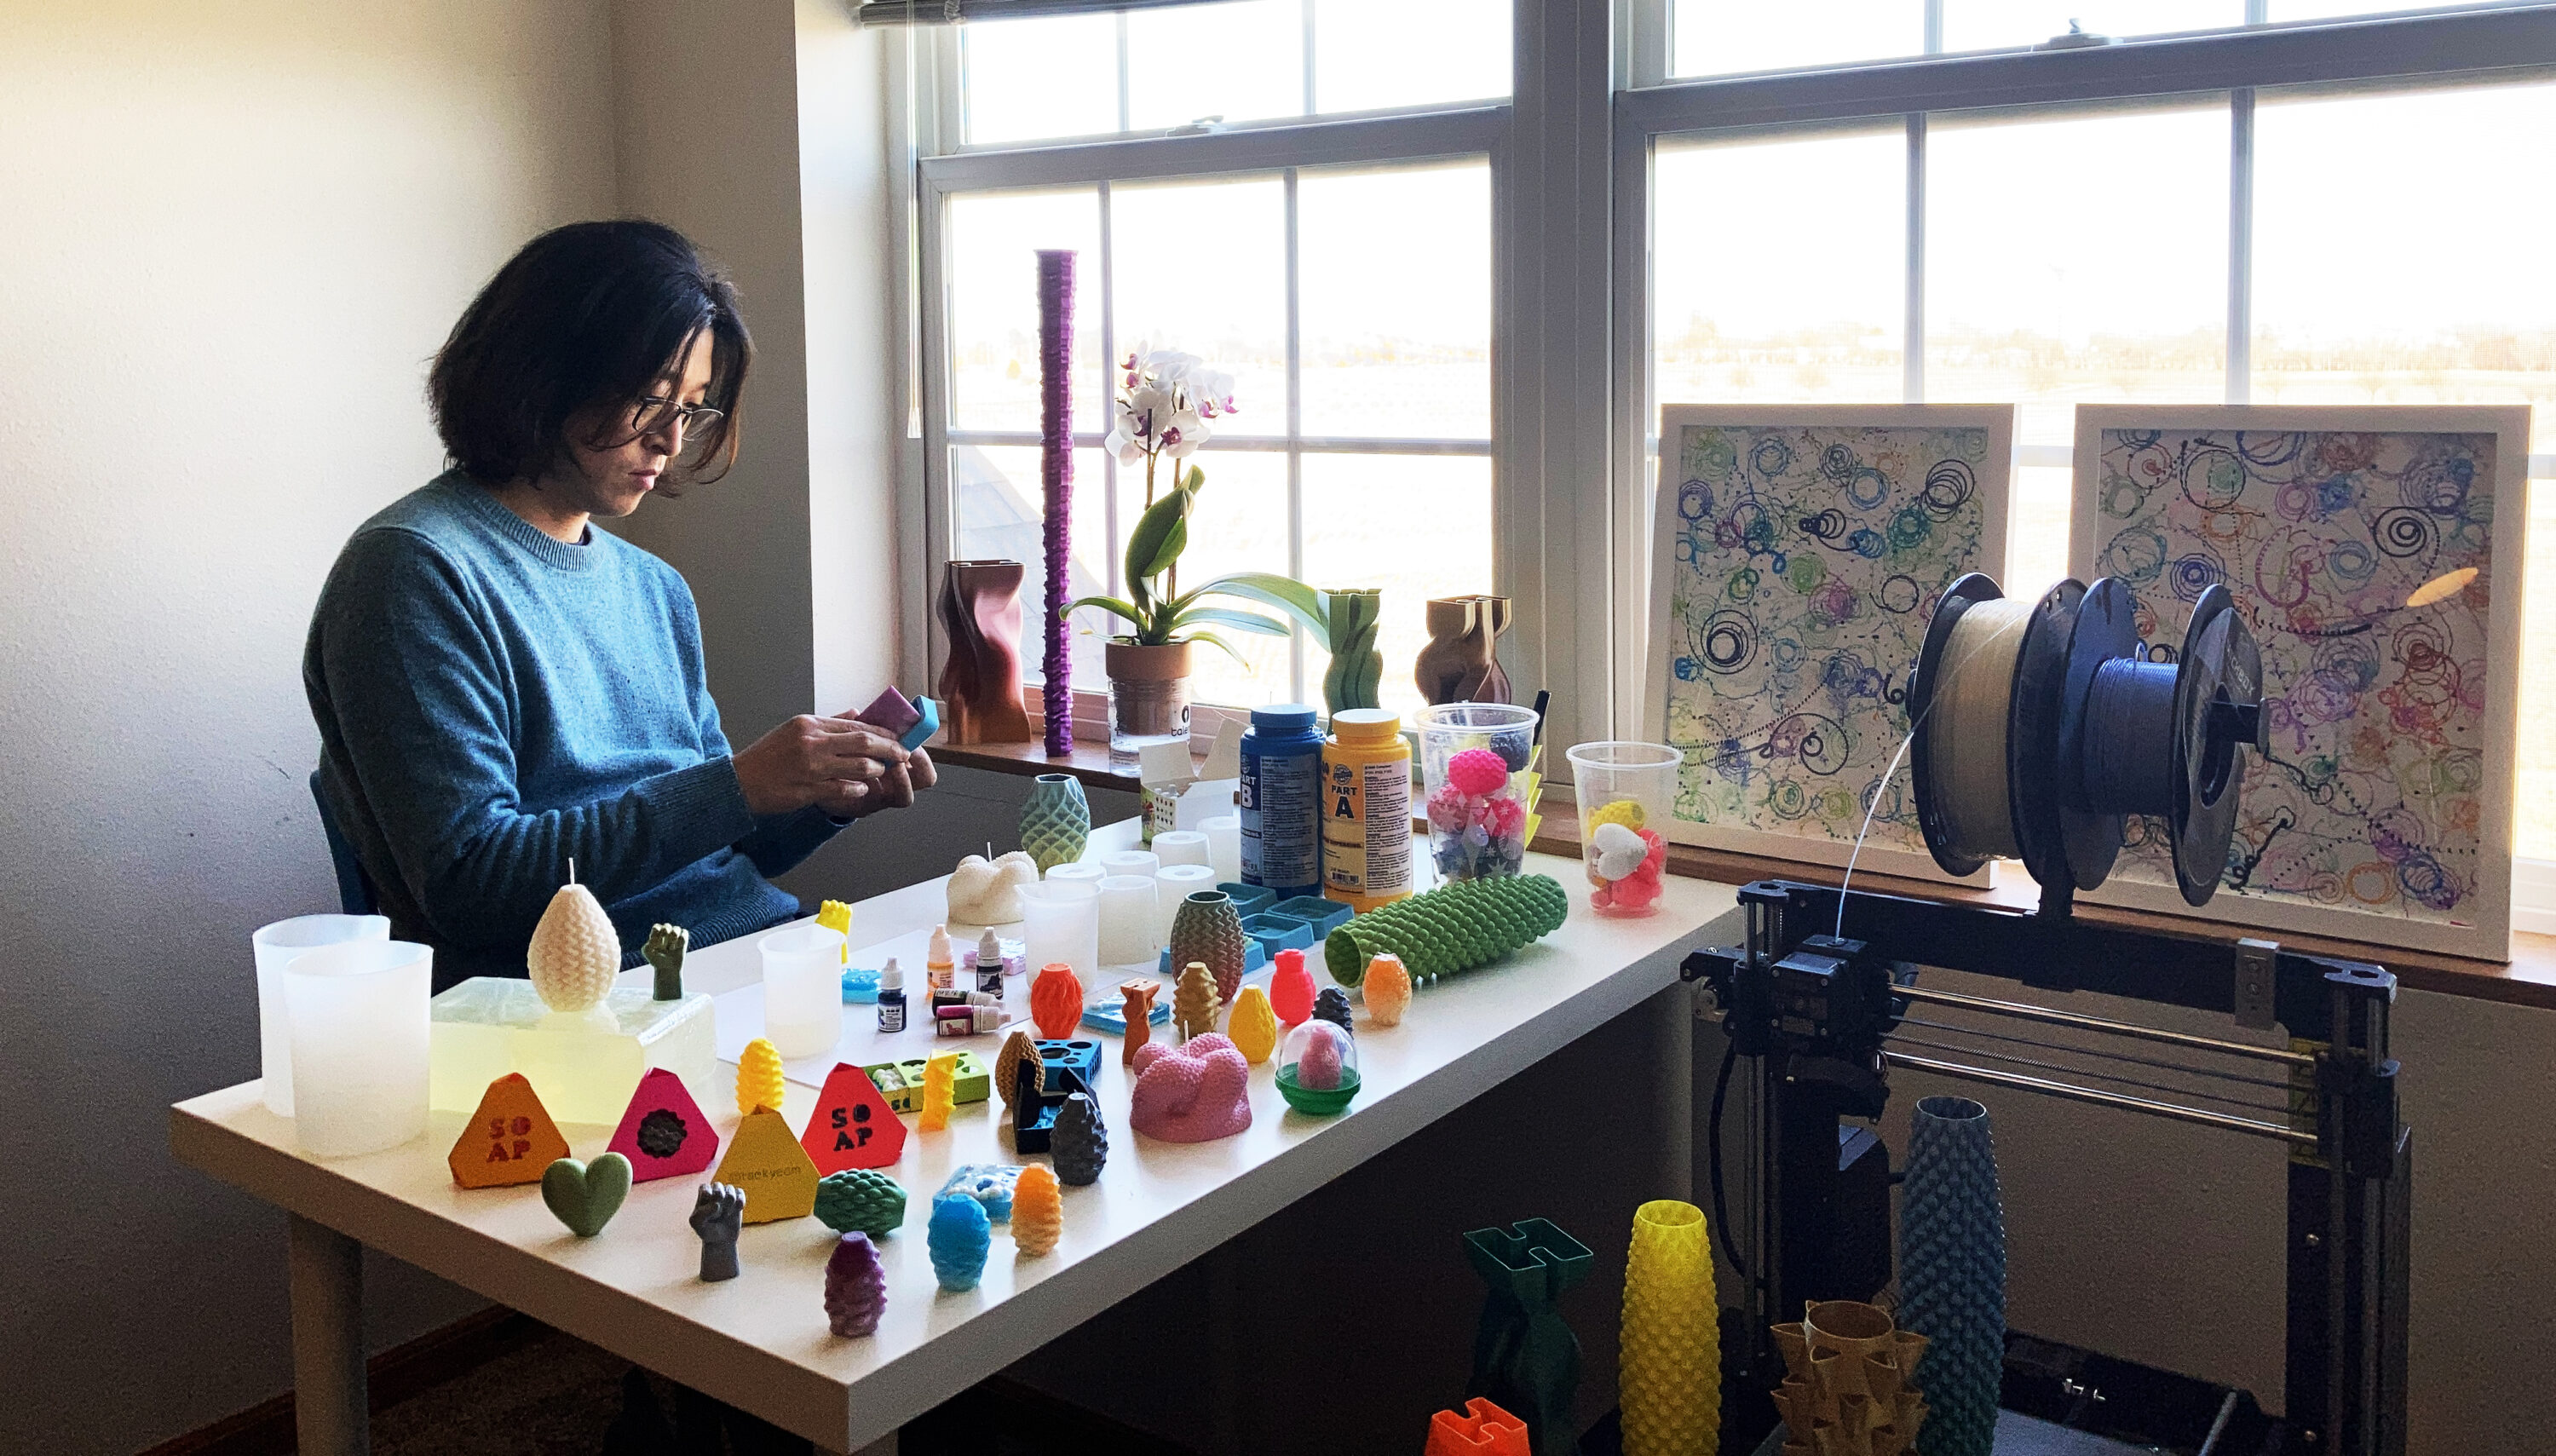 Taekyeom Lee working at his desk surrounded by 3d printed creations